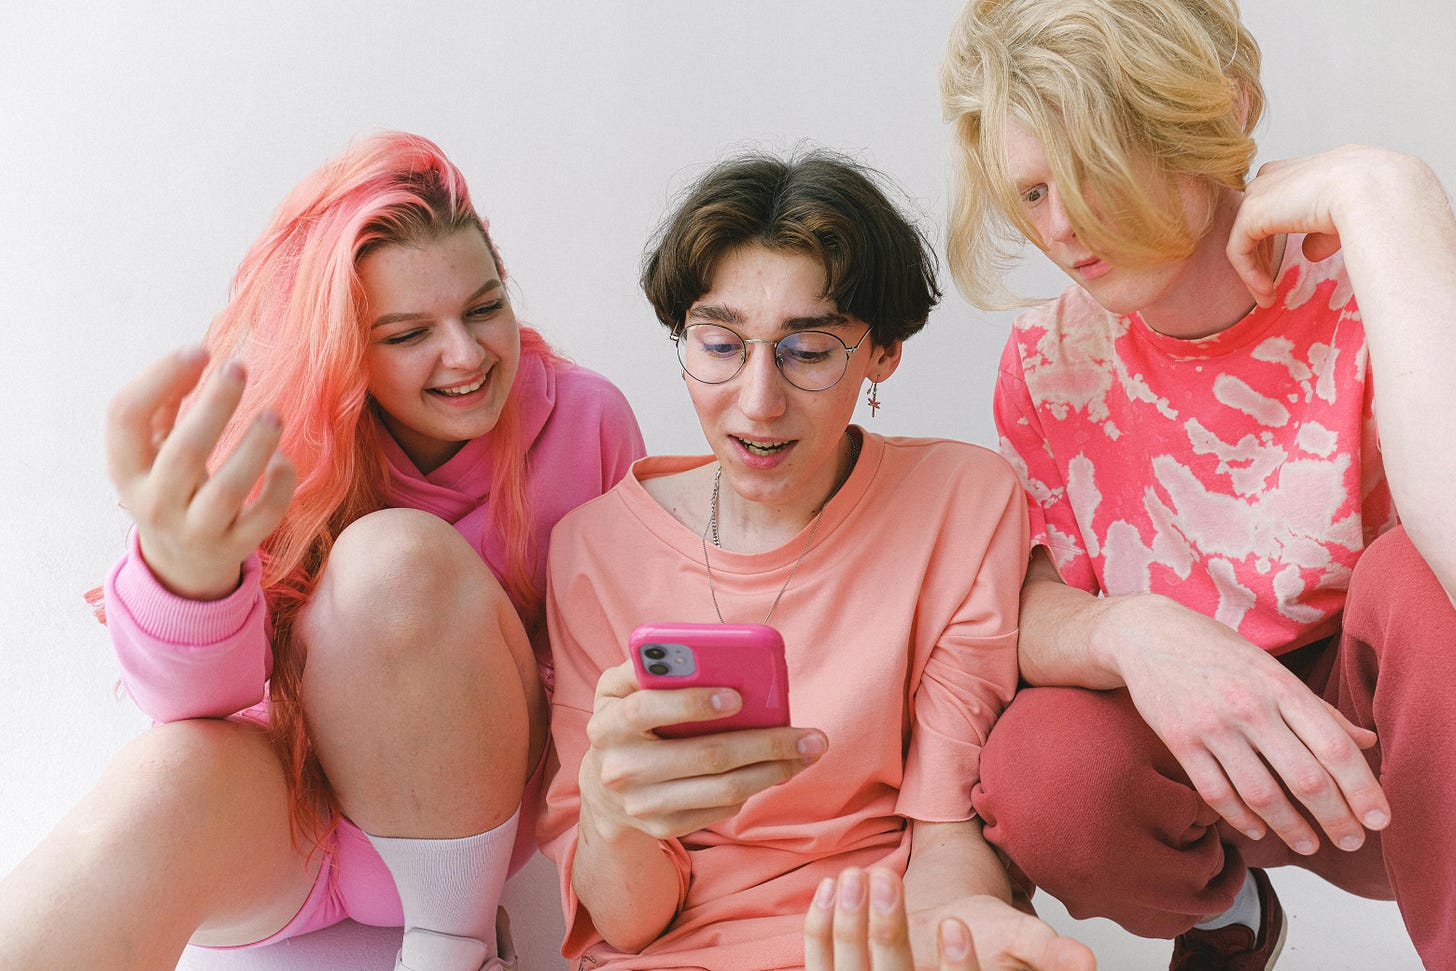 three people wearing pink looking at a smartphone